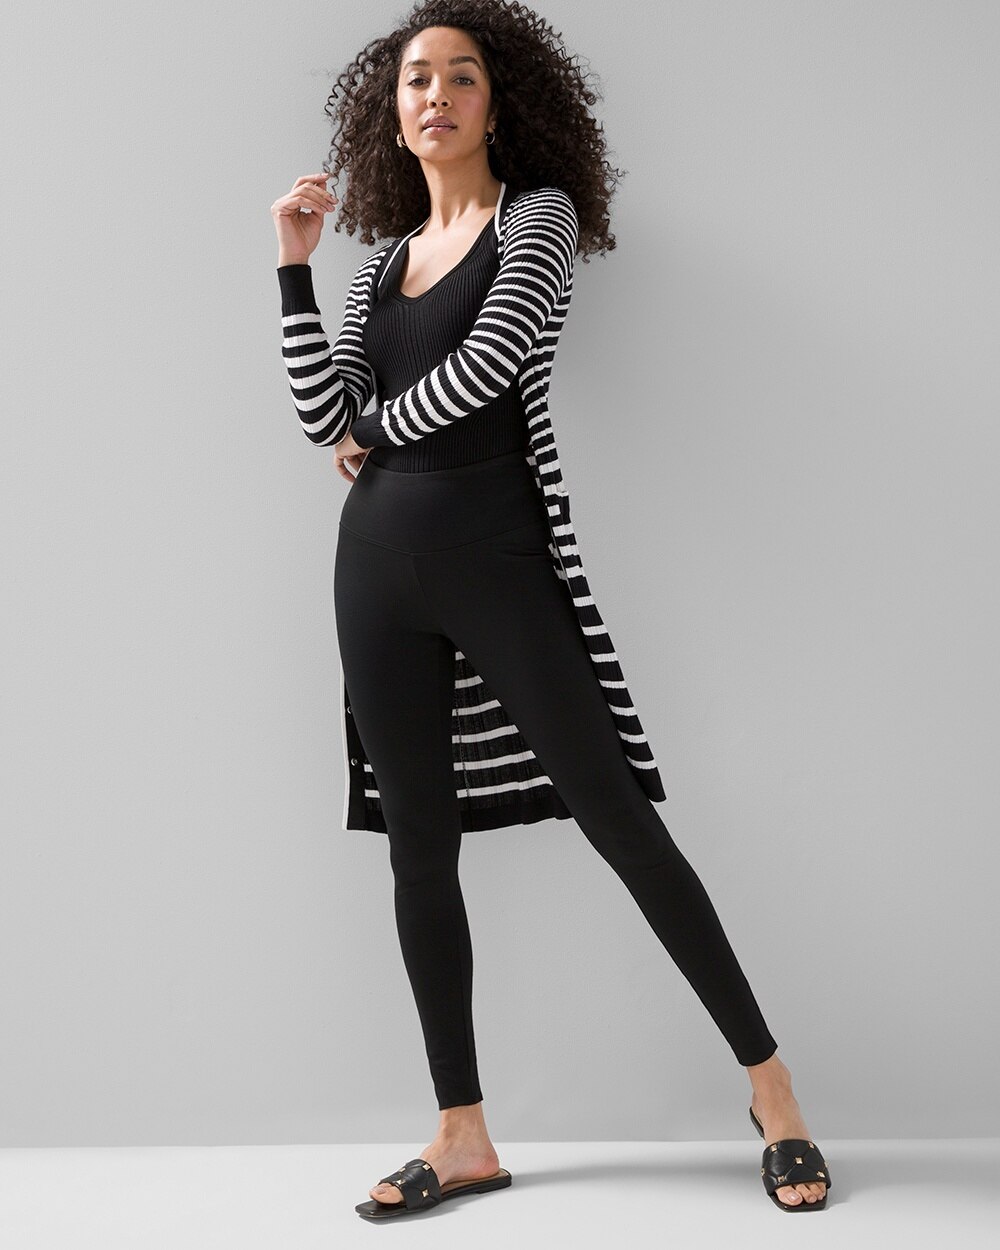 Ponte WHBM Runway Leggings video preview image, click to start video